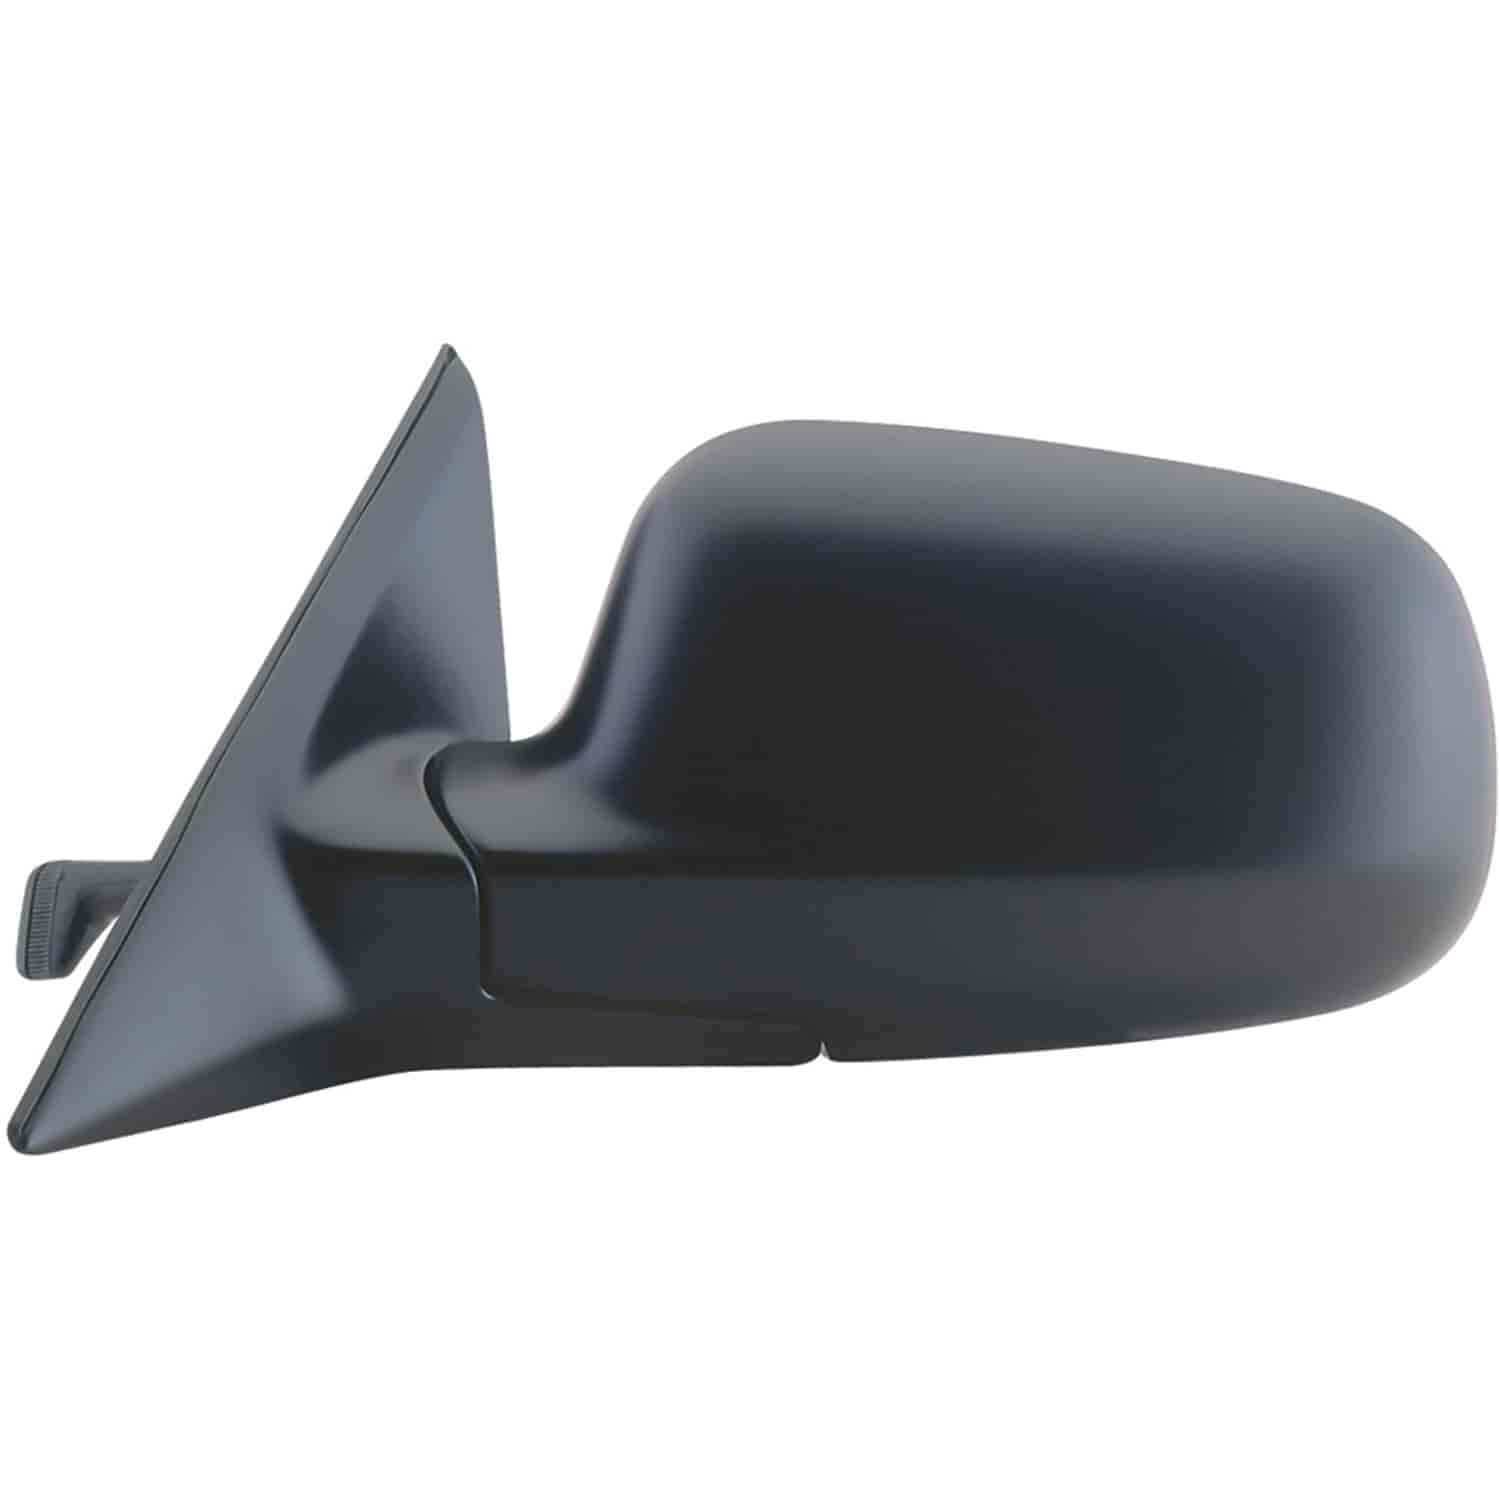 OEM Style Replacement mirror for 94-97 Honda Accord Sedan driver side mirror tested to fit and funct